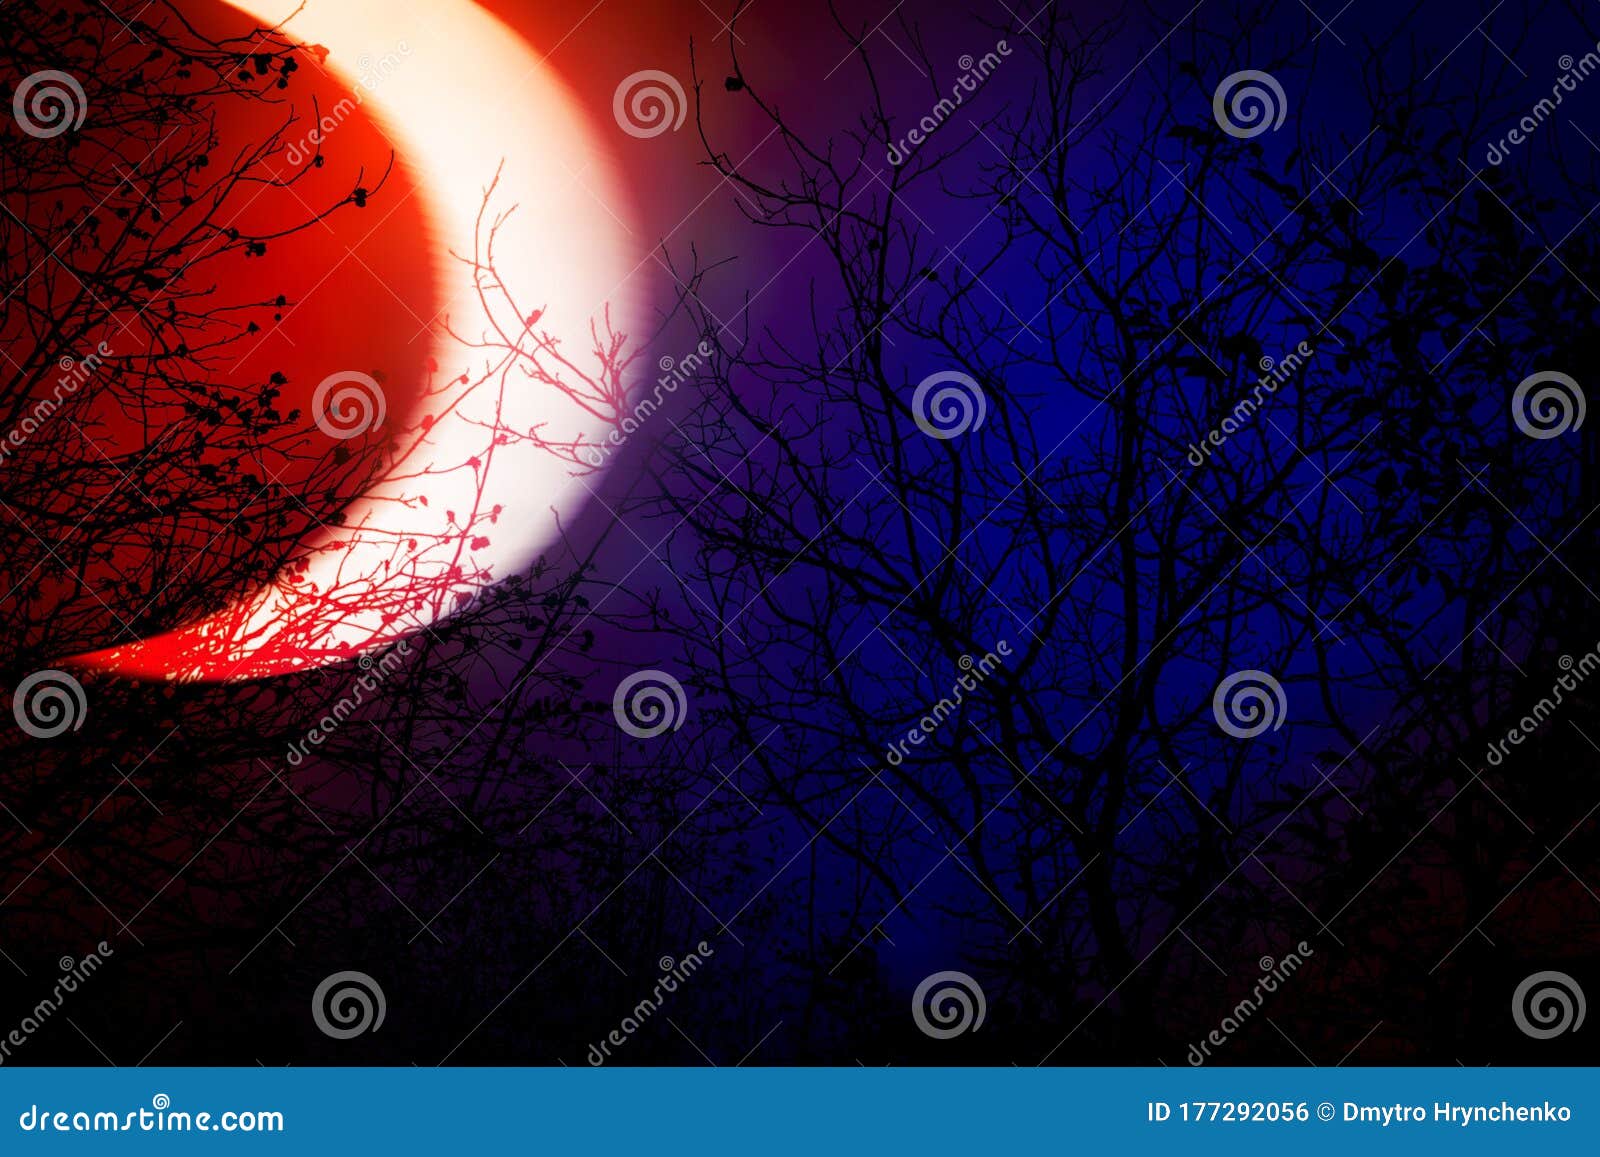 occulture landscape silhouettes. tree branches on deep red and blue sky background at night dusk time. big horned moon raises over